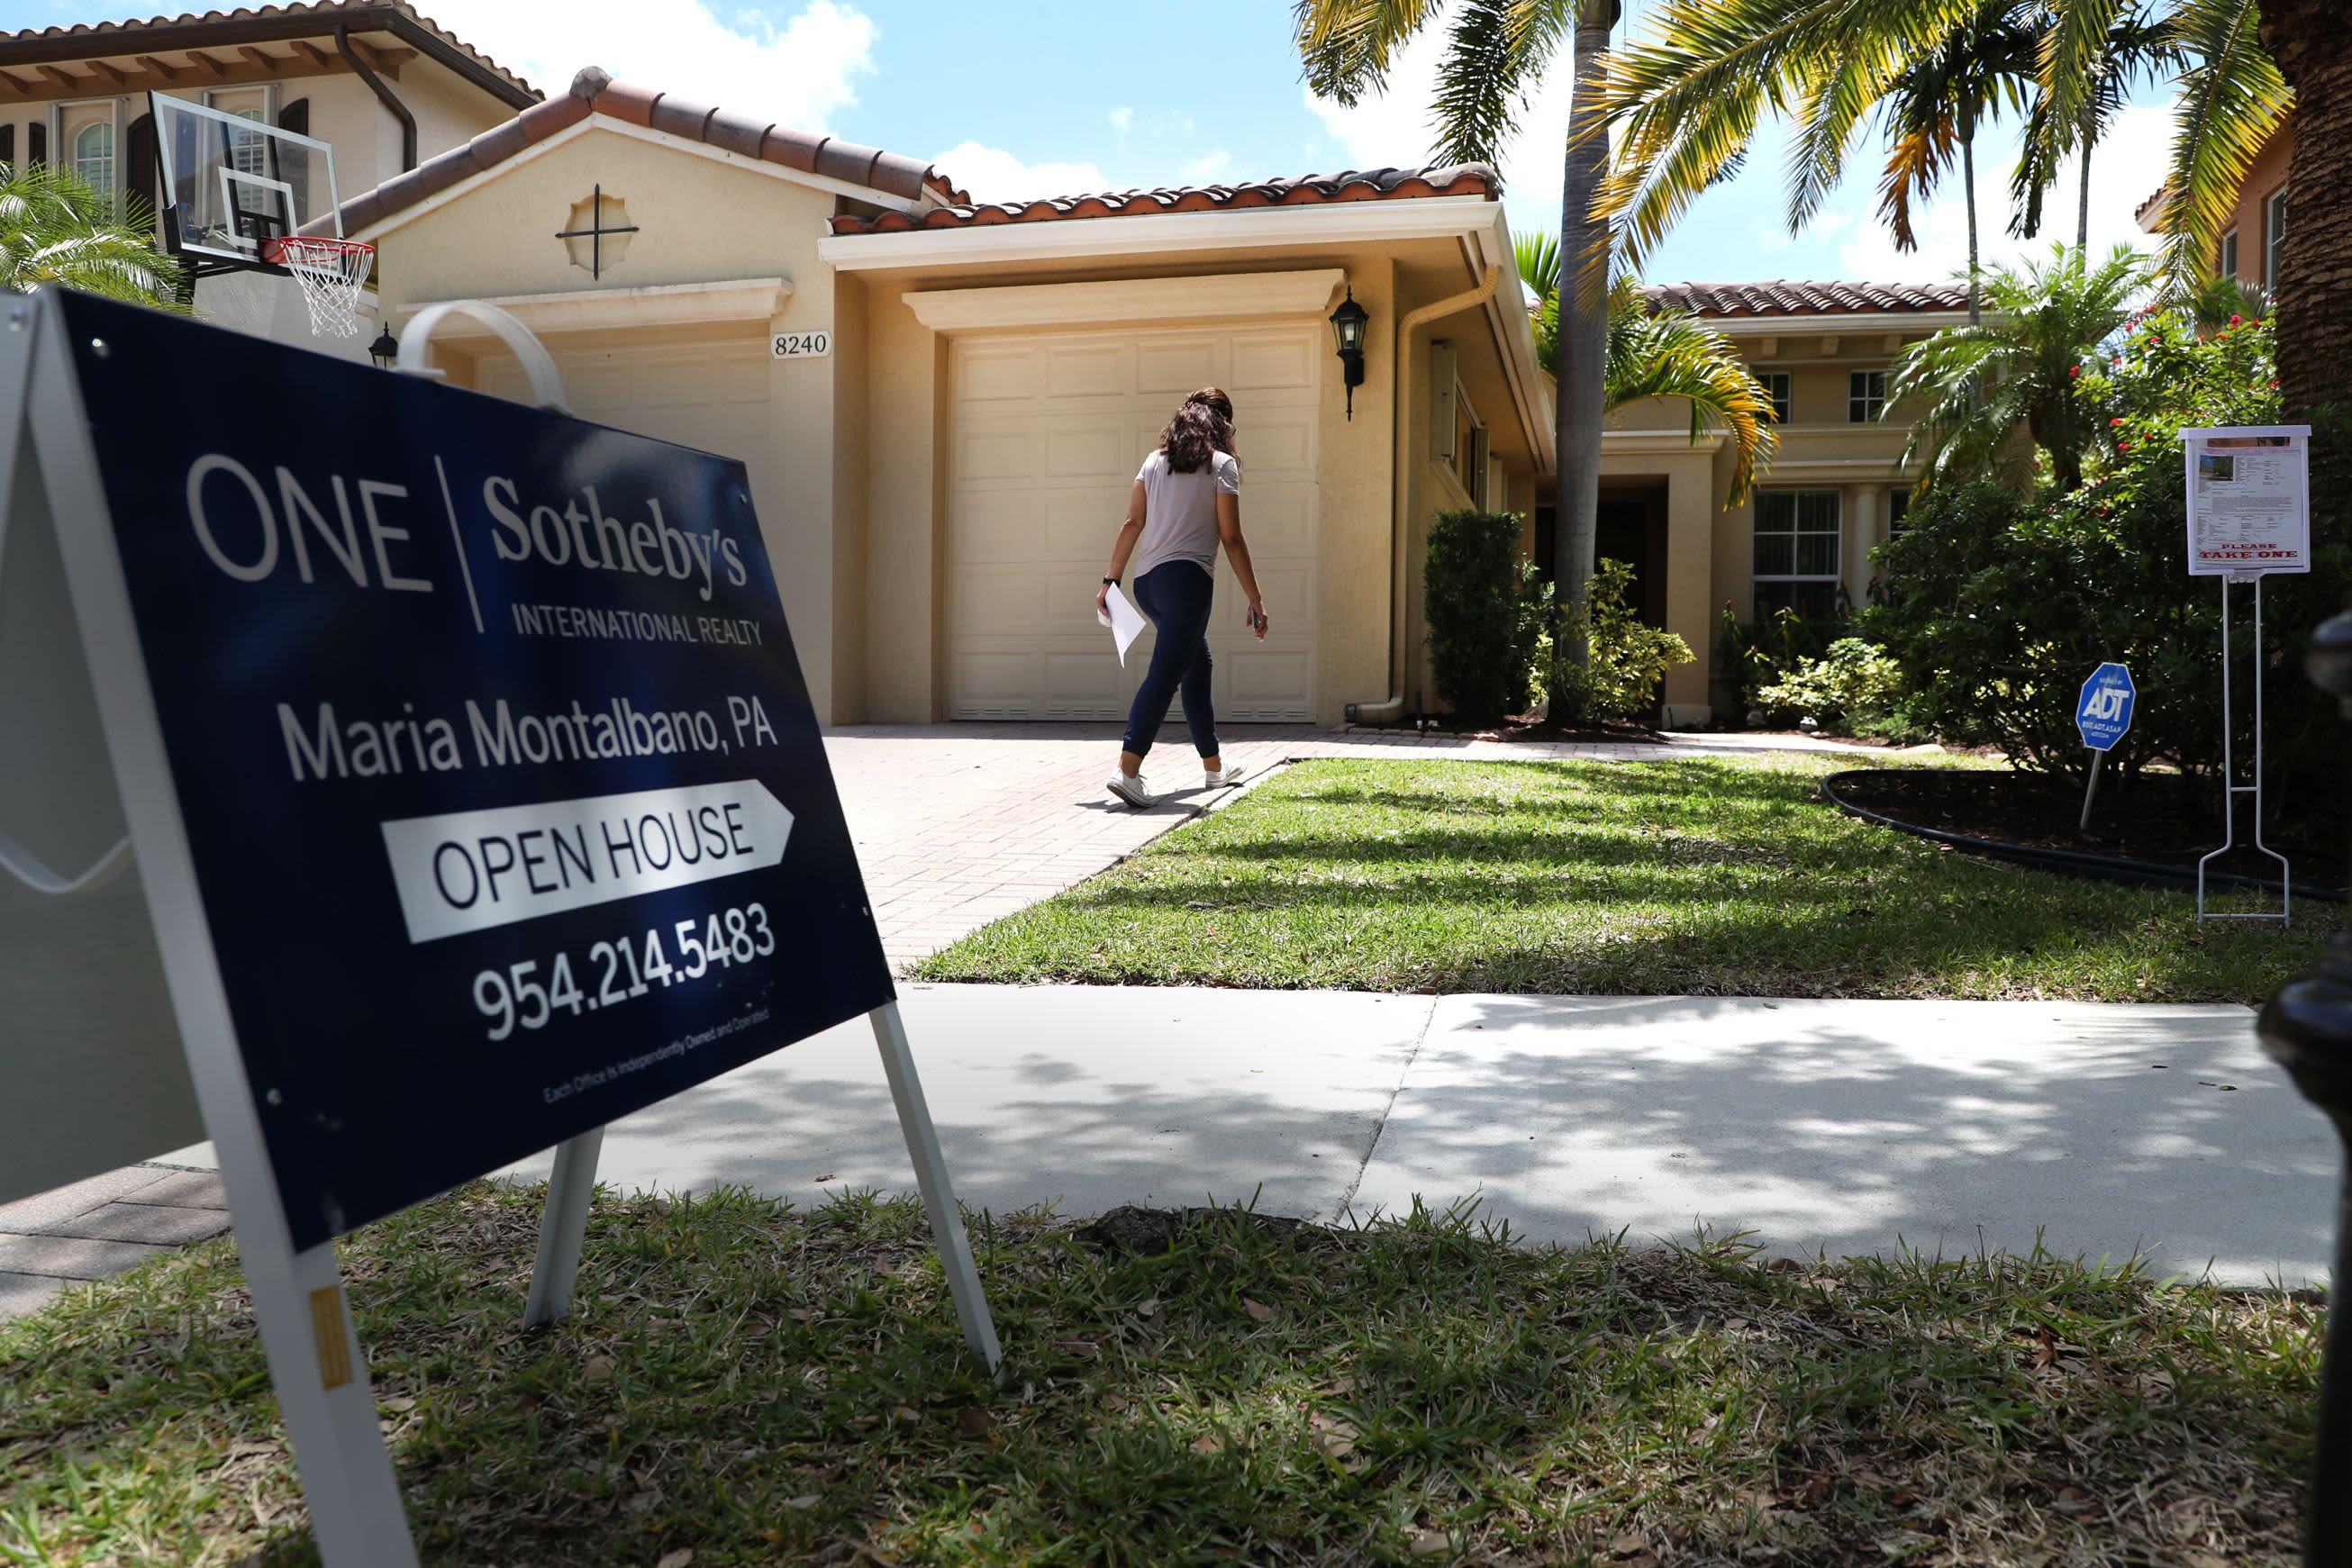 Home Price Declines May Be Over, S&P Case-Shiller Says – NBC 7 San Diego